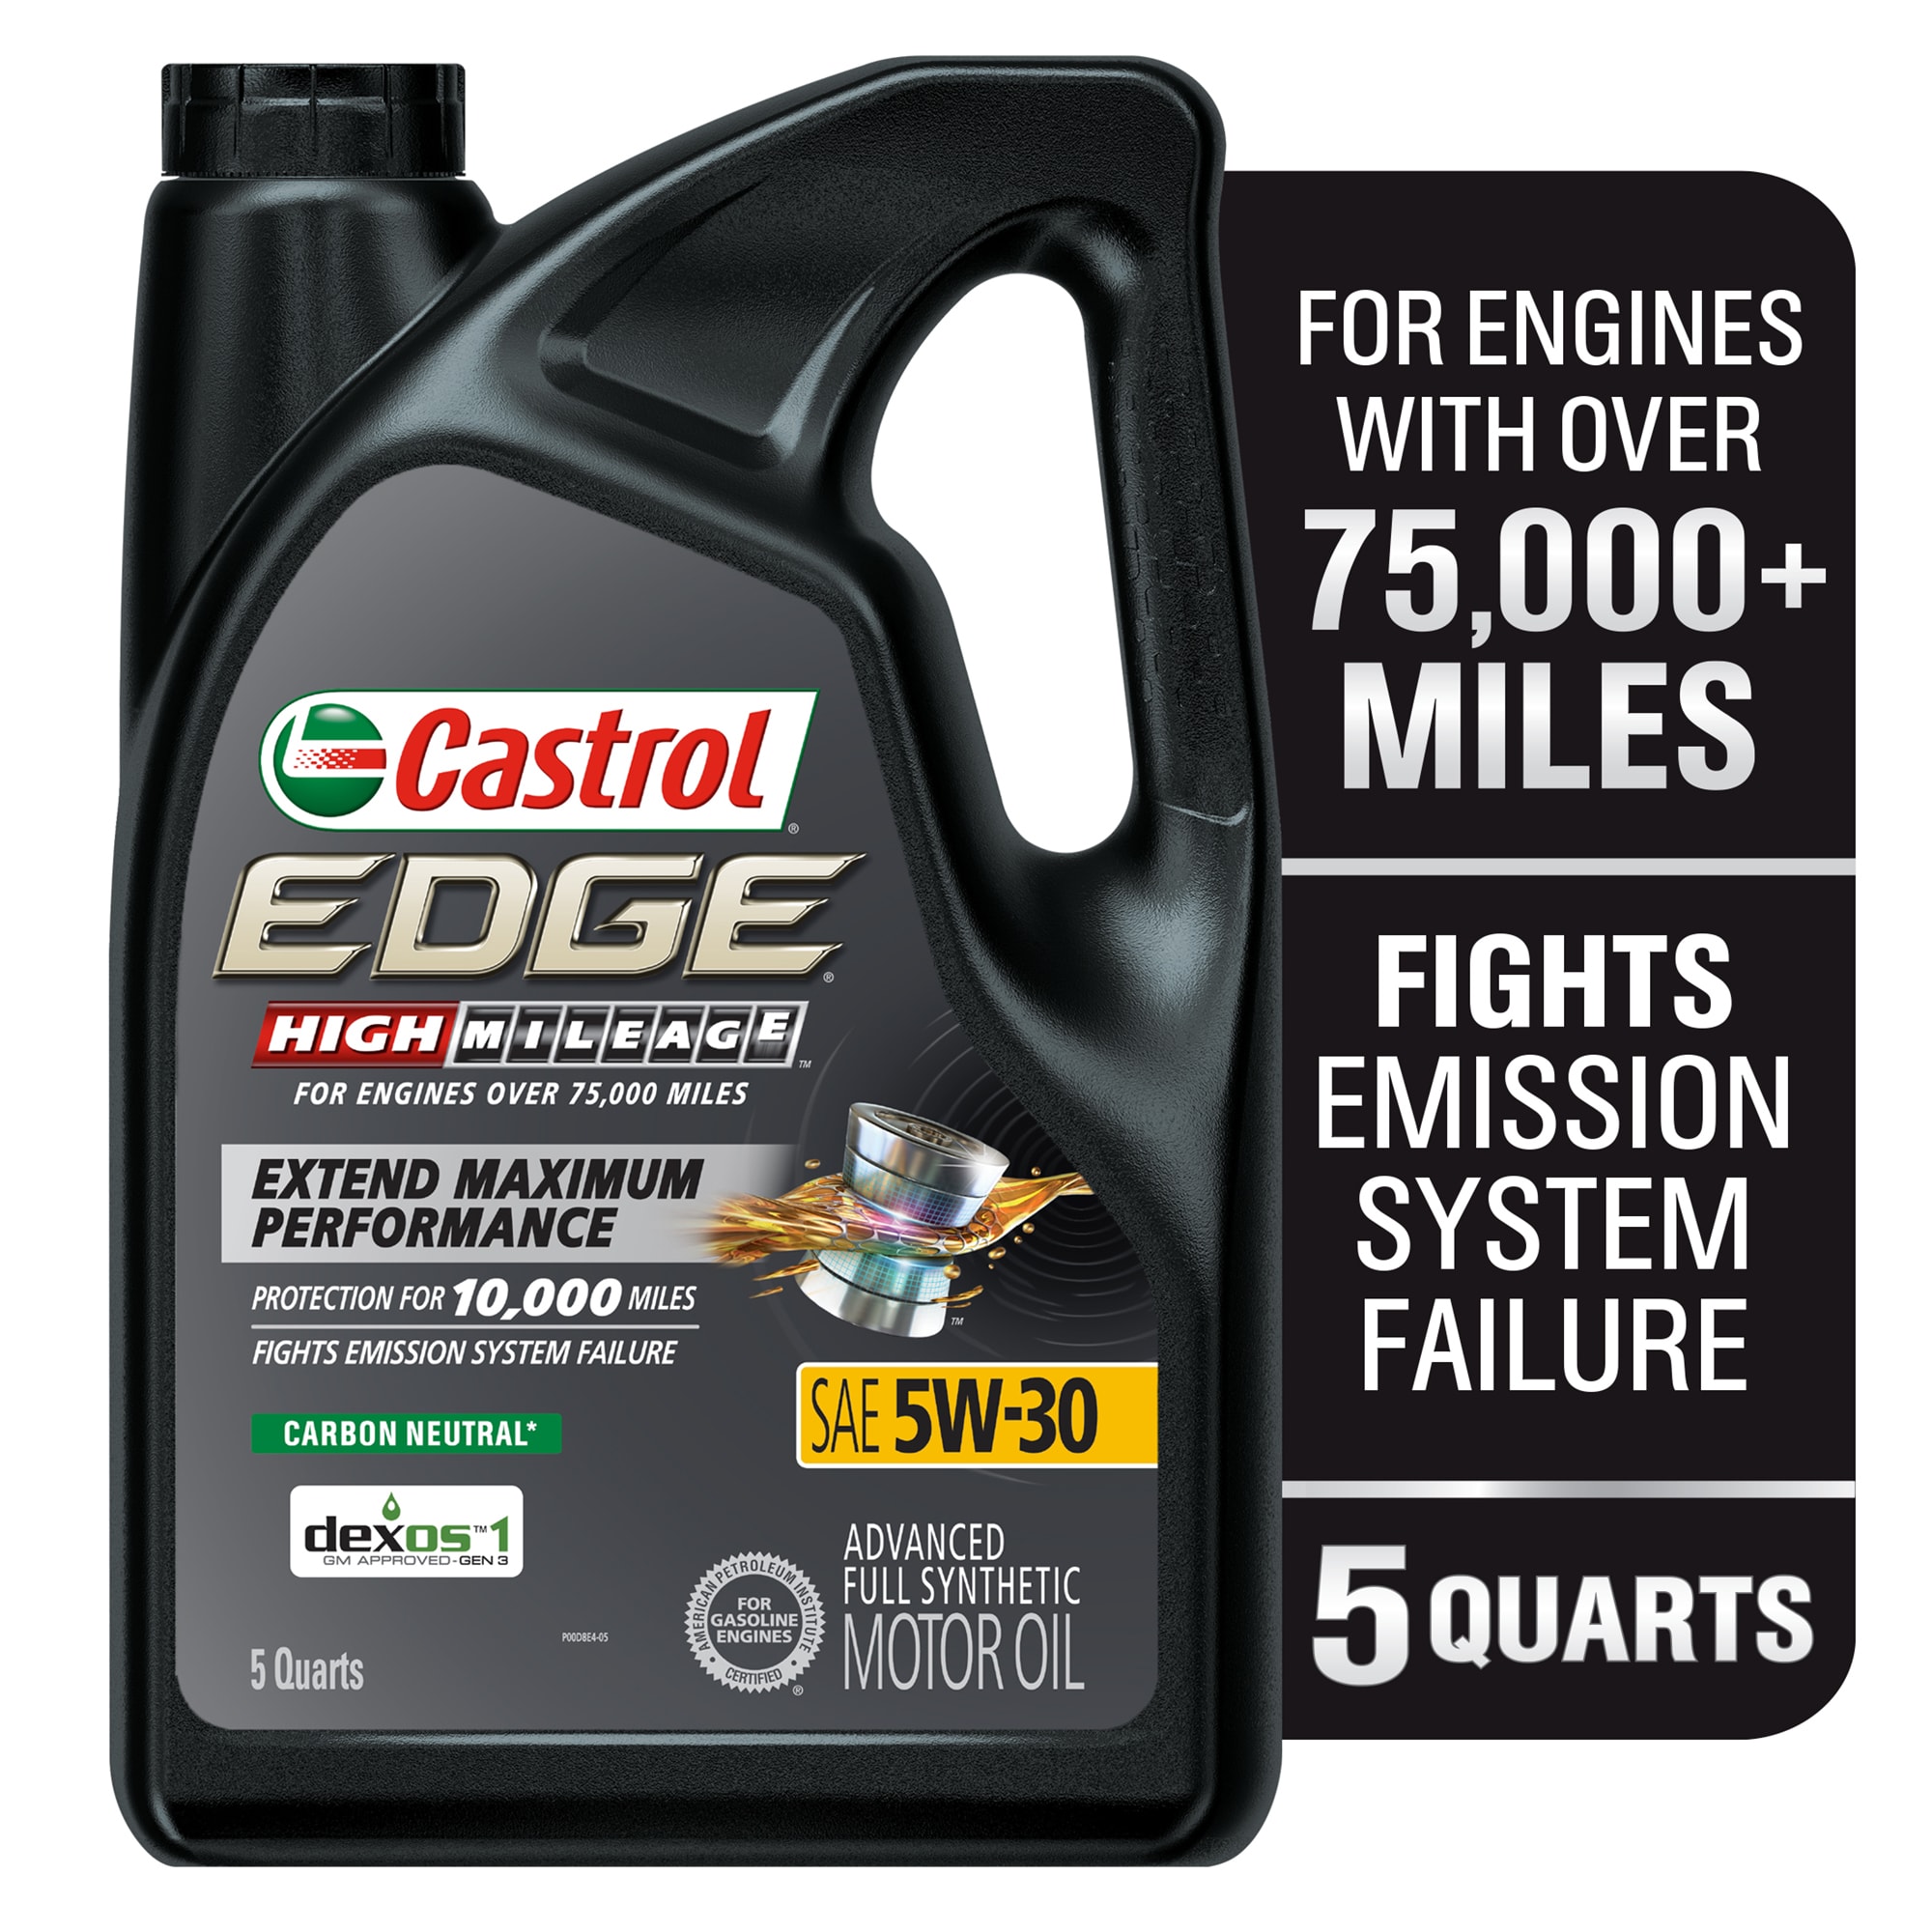 CASTROL EDGE High Mileage 5W-30 Advanced Full Synthetic Motor Oil, 5 Quarts  in the Motor Oil & Additives department at